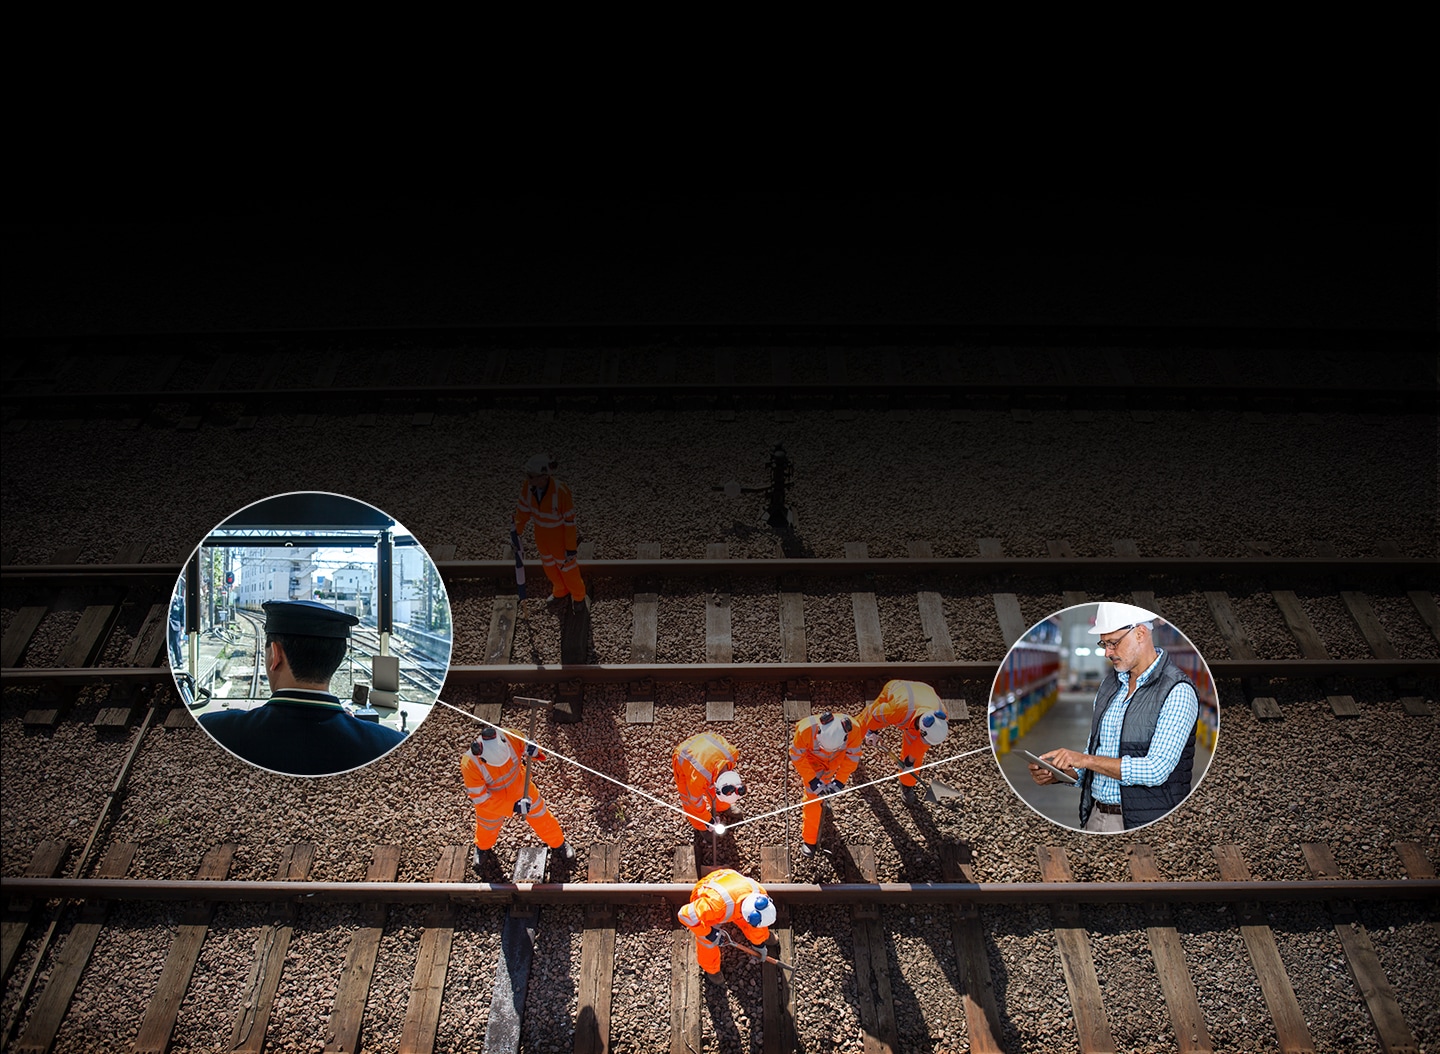 An illustrative image of workers maintaining the railway and the site has been shared with conductors.